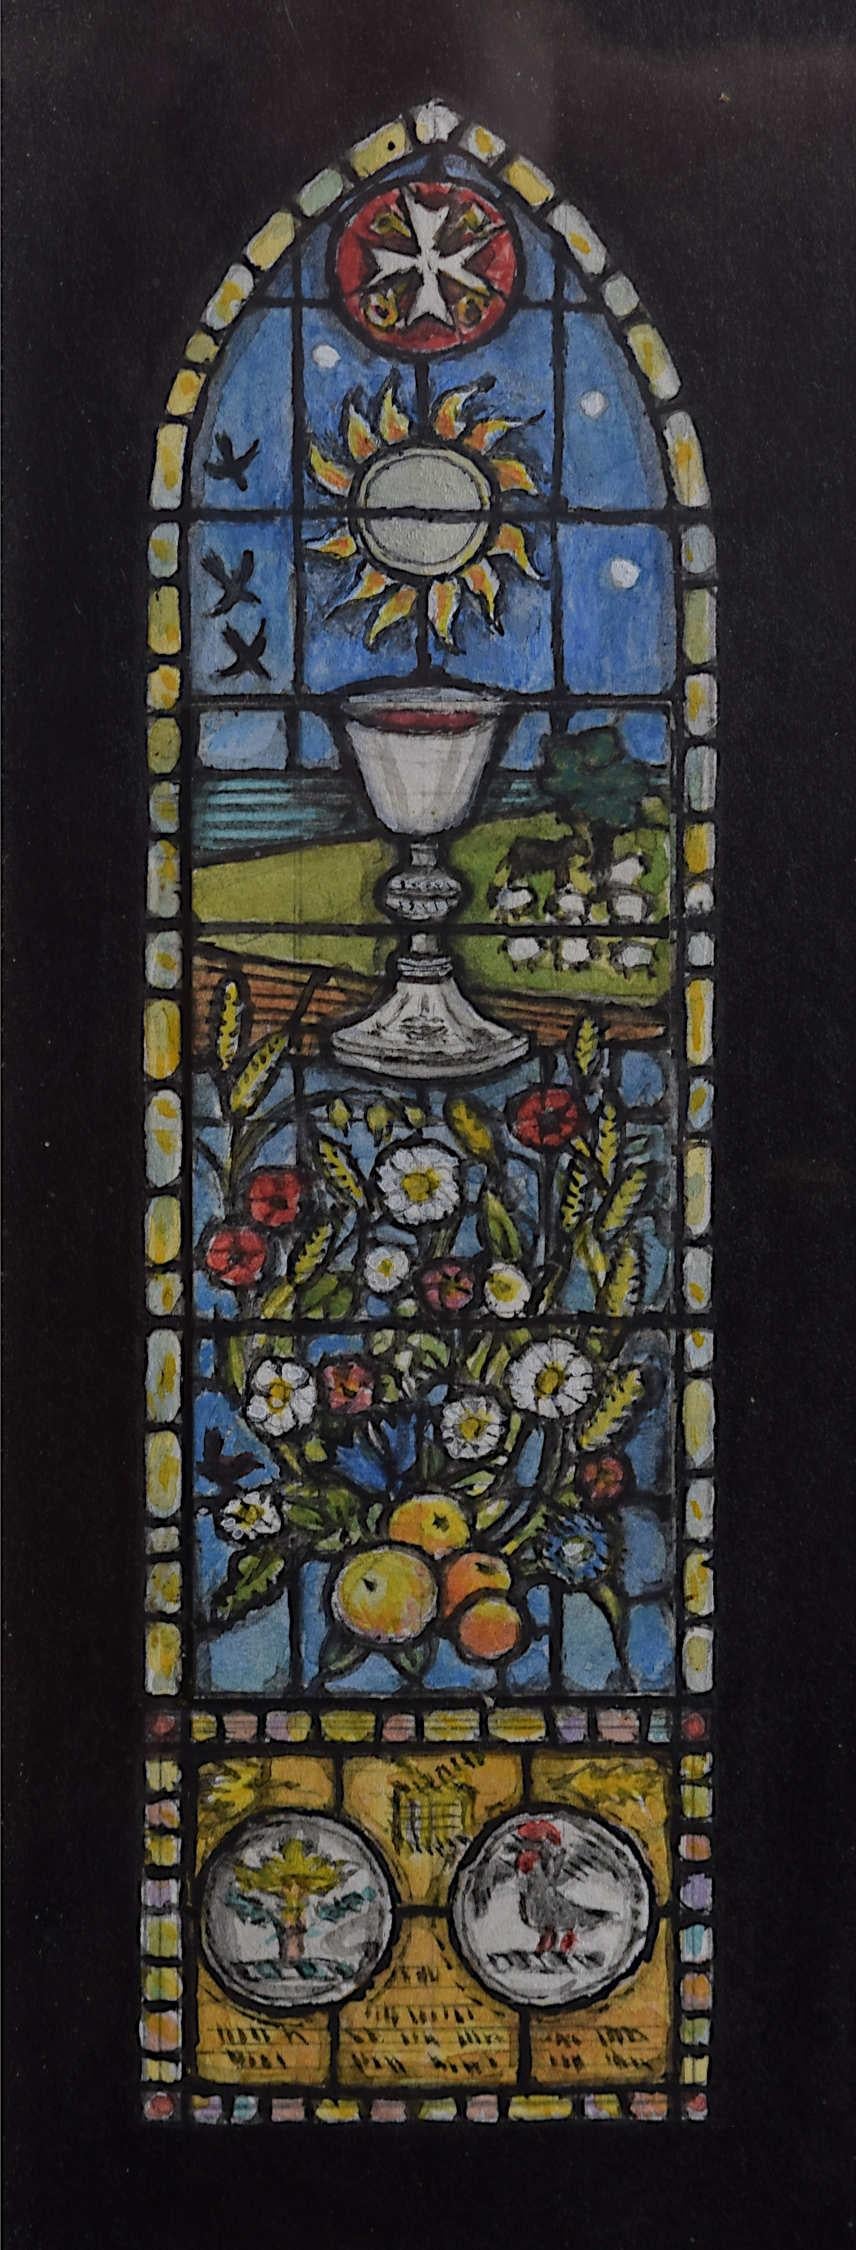 We acquired a series of watercolour stained glass designs from Jane Gray's studio. To find more scroll down to "More from this Seller" and below it click on "See all from this seller." 

Jane Gray (b.1931)
Stained Glass Design
Watercolour
16.5 x 5.5